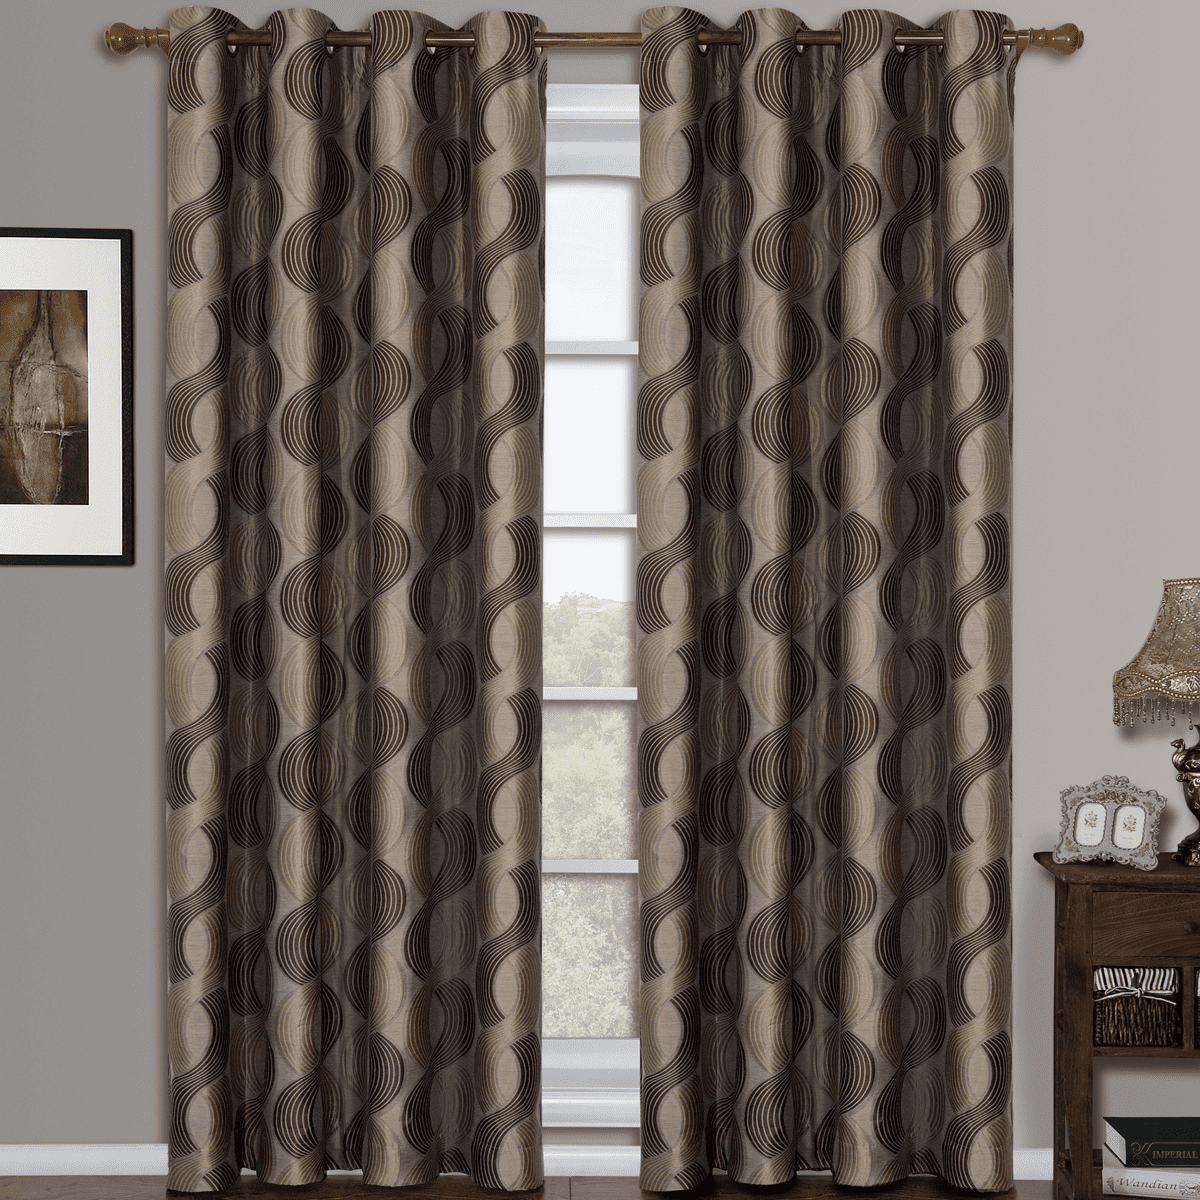 Set of 2 Tuscany Top Grommet Window Curtain Geometric Abstract Jacquard Panels 